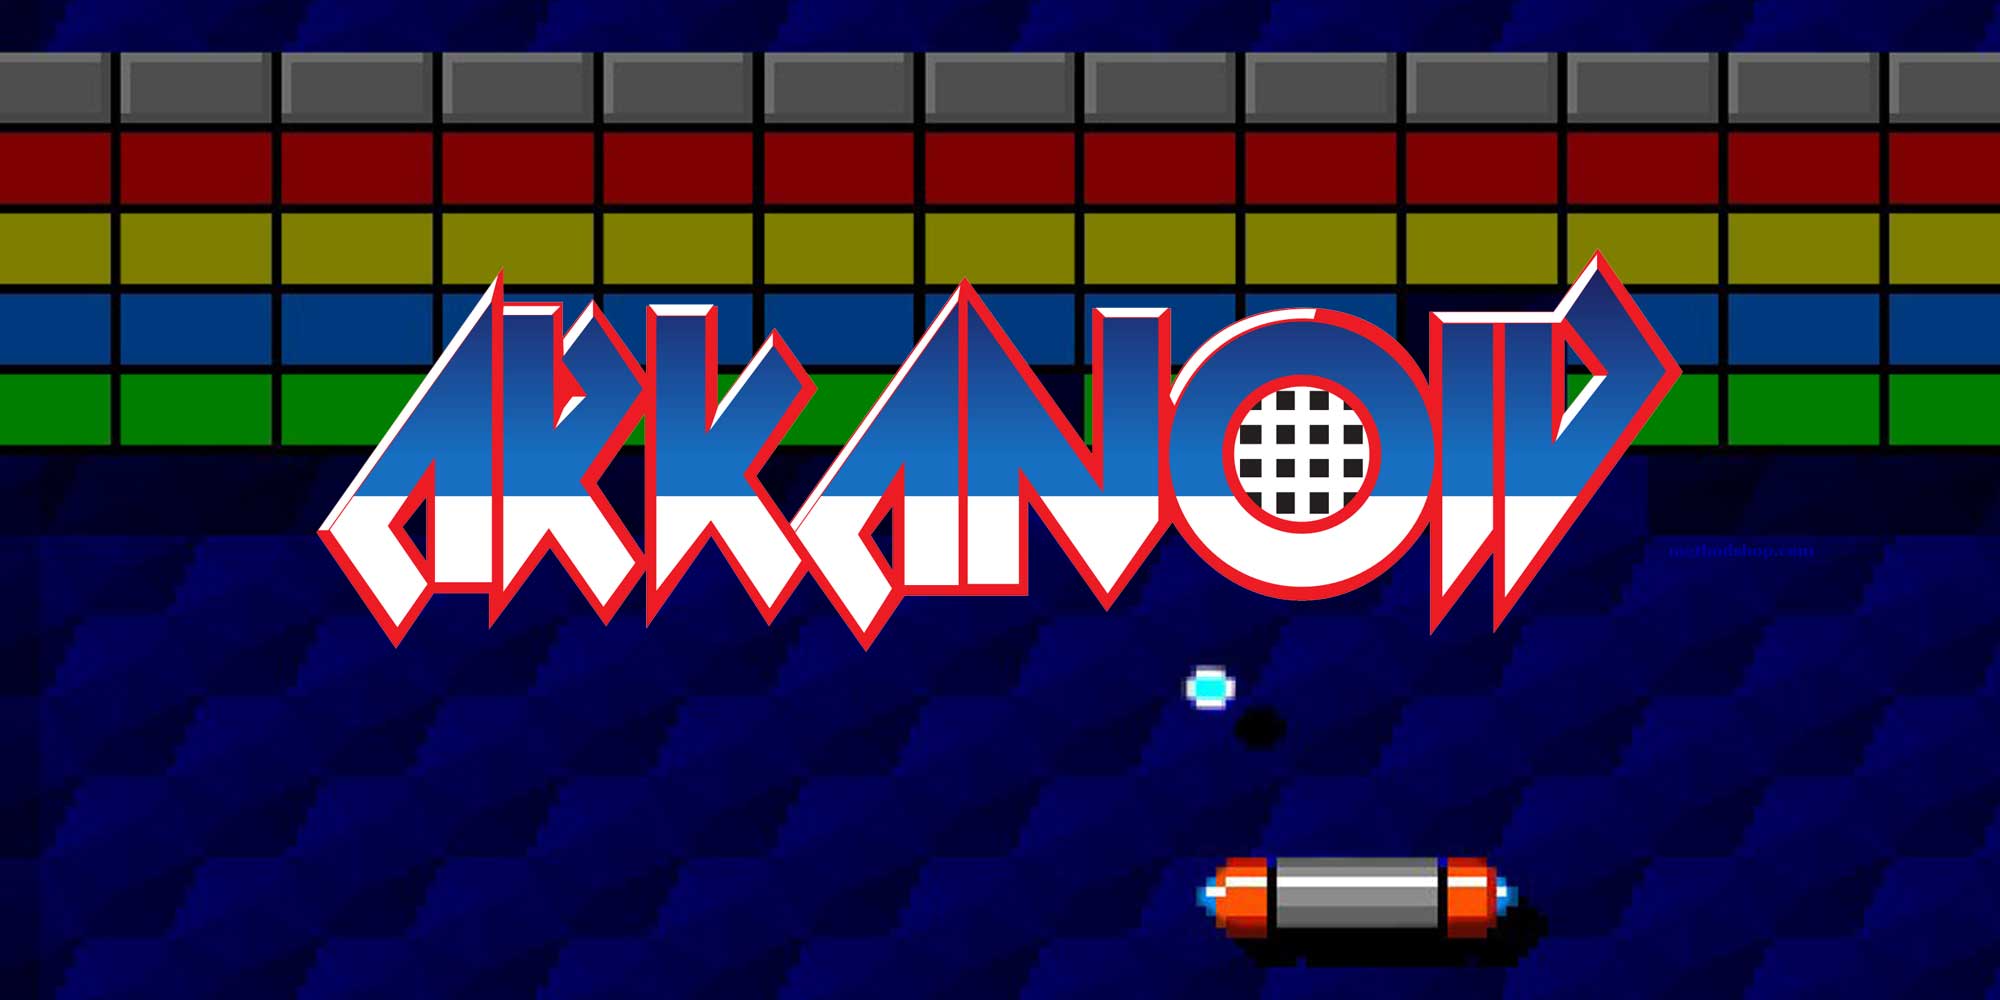 Arkanoid - Play This Classic Arcade Game For Free